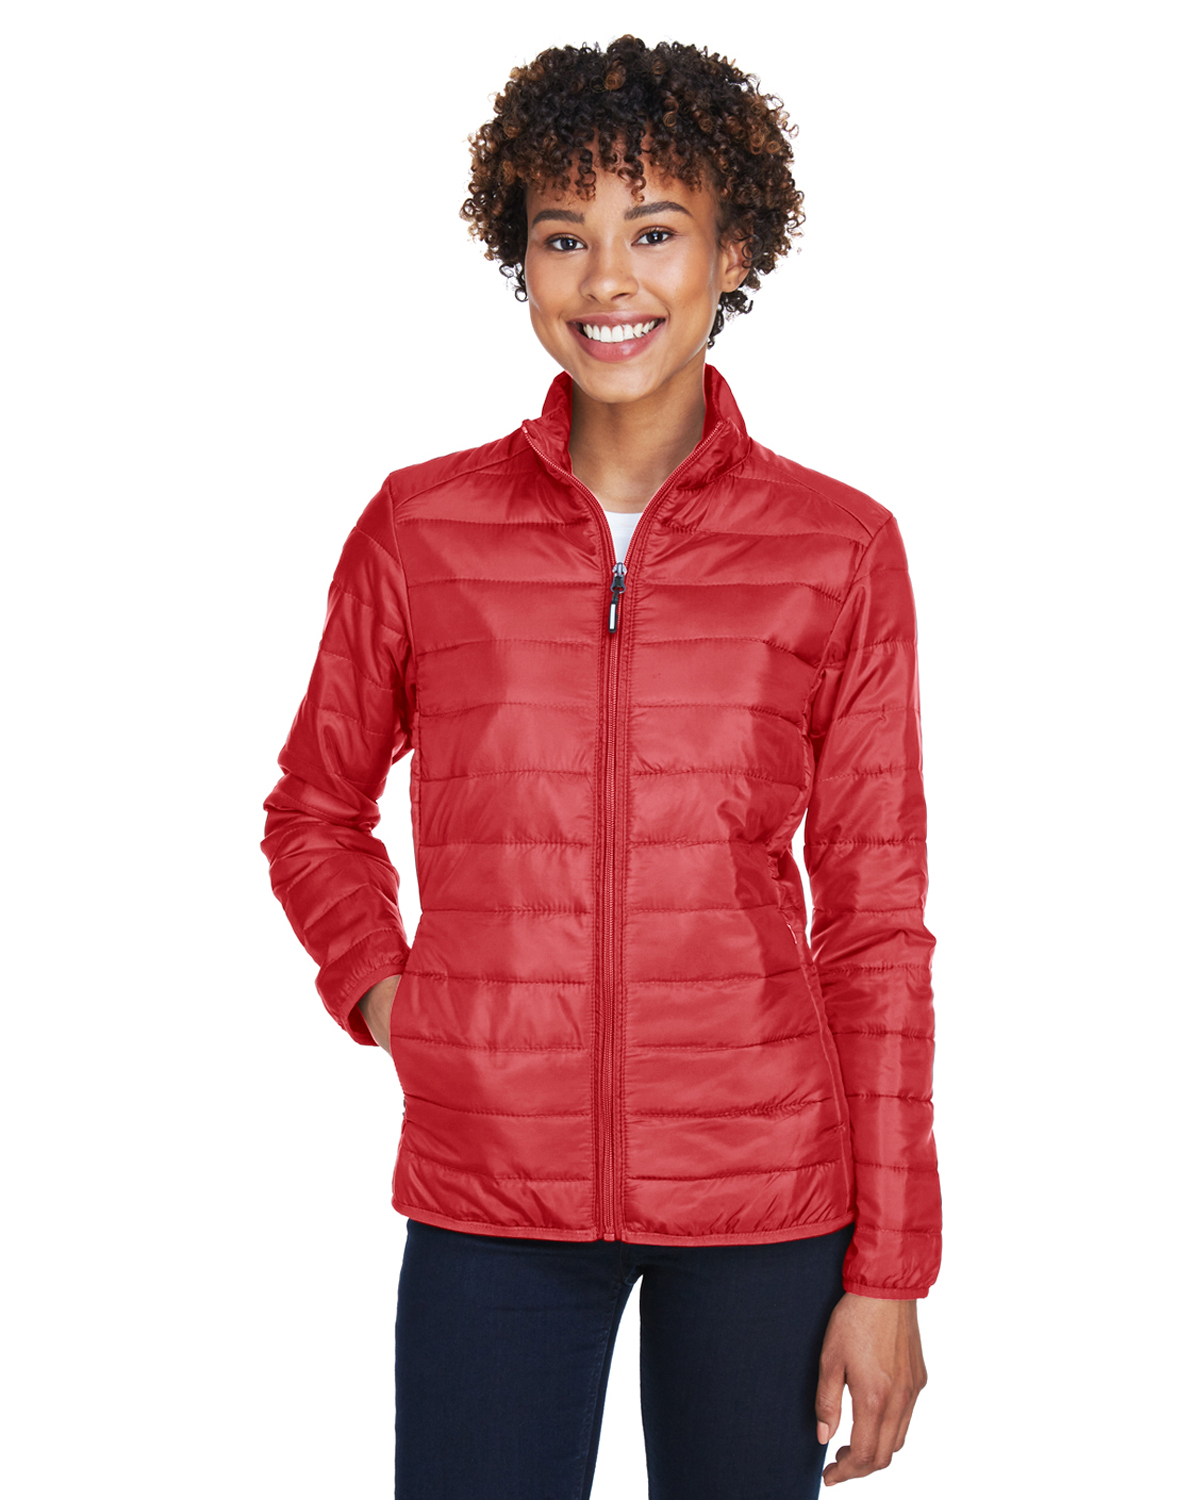 Ladies' Prevail Packable Puffer Jacket - CLASSIC RED - L - image 1 of 3